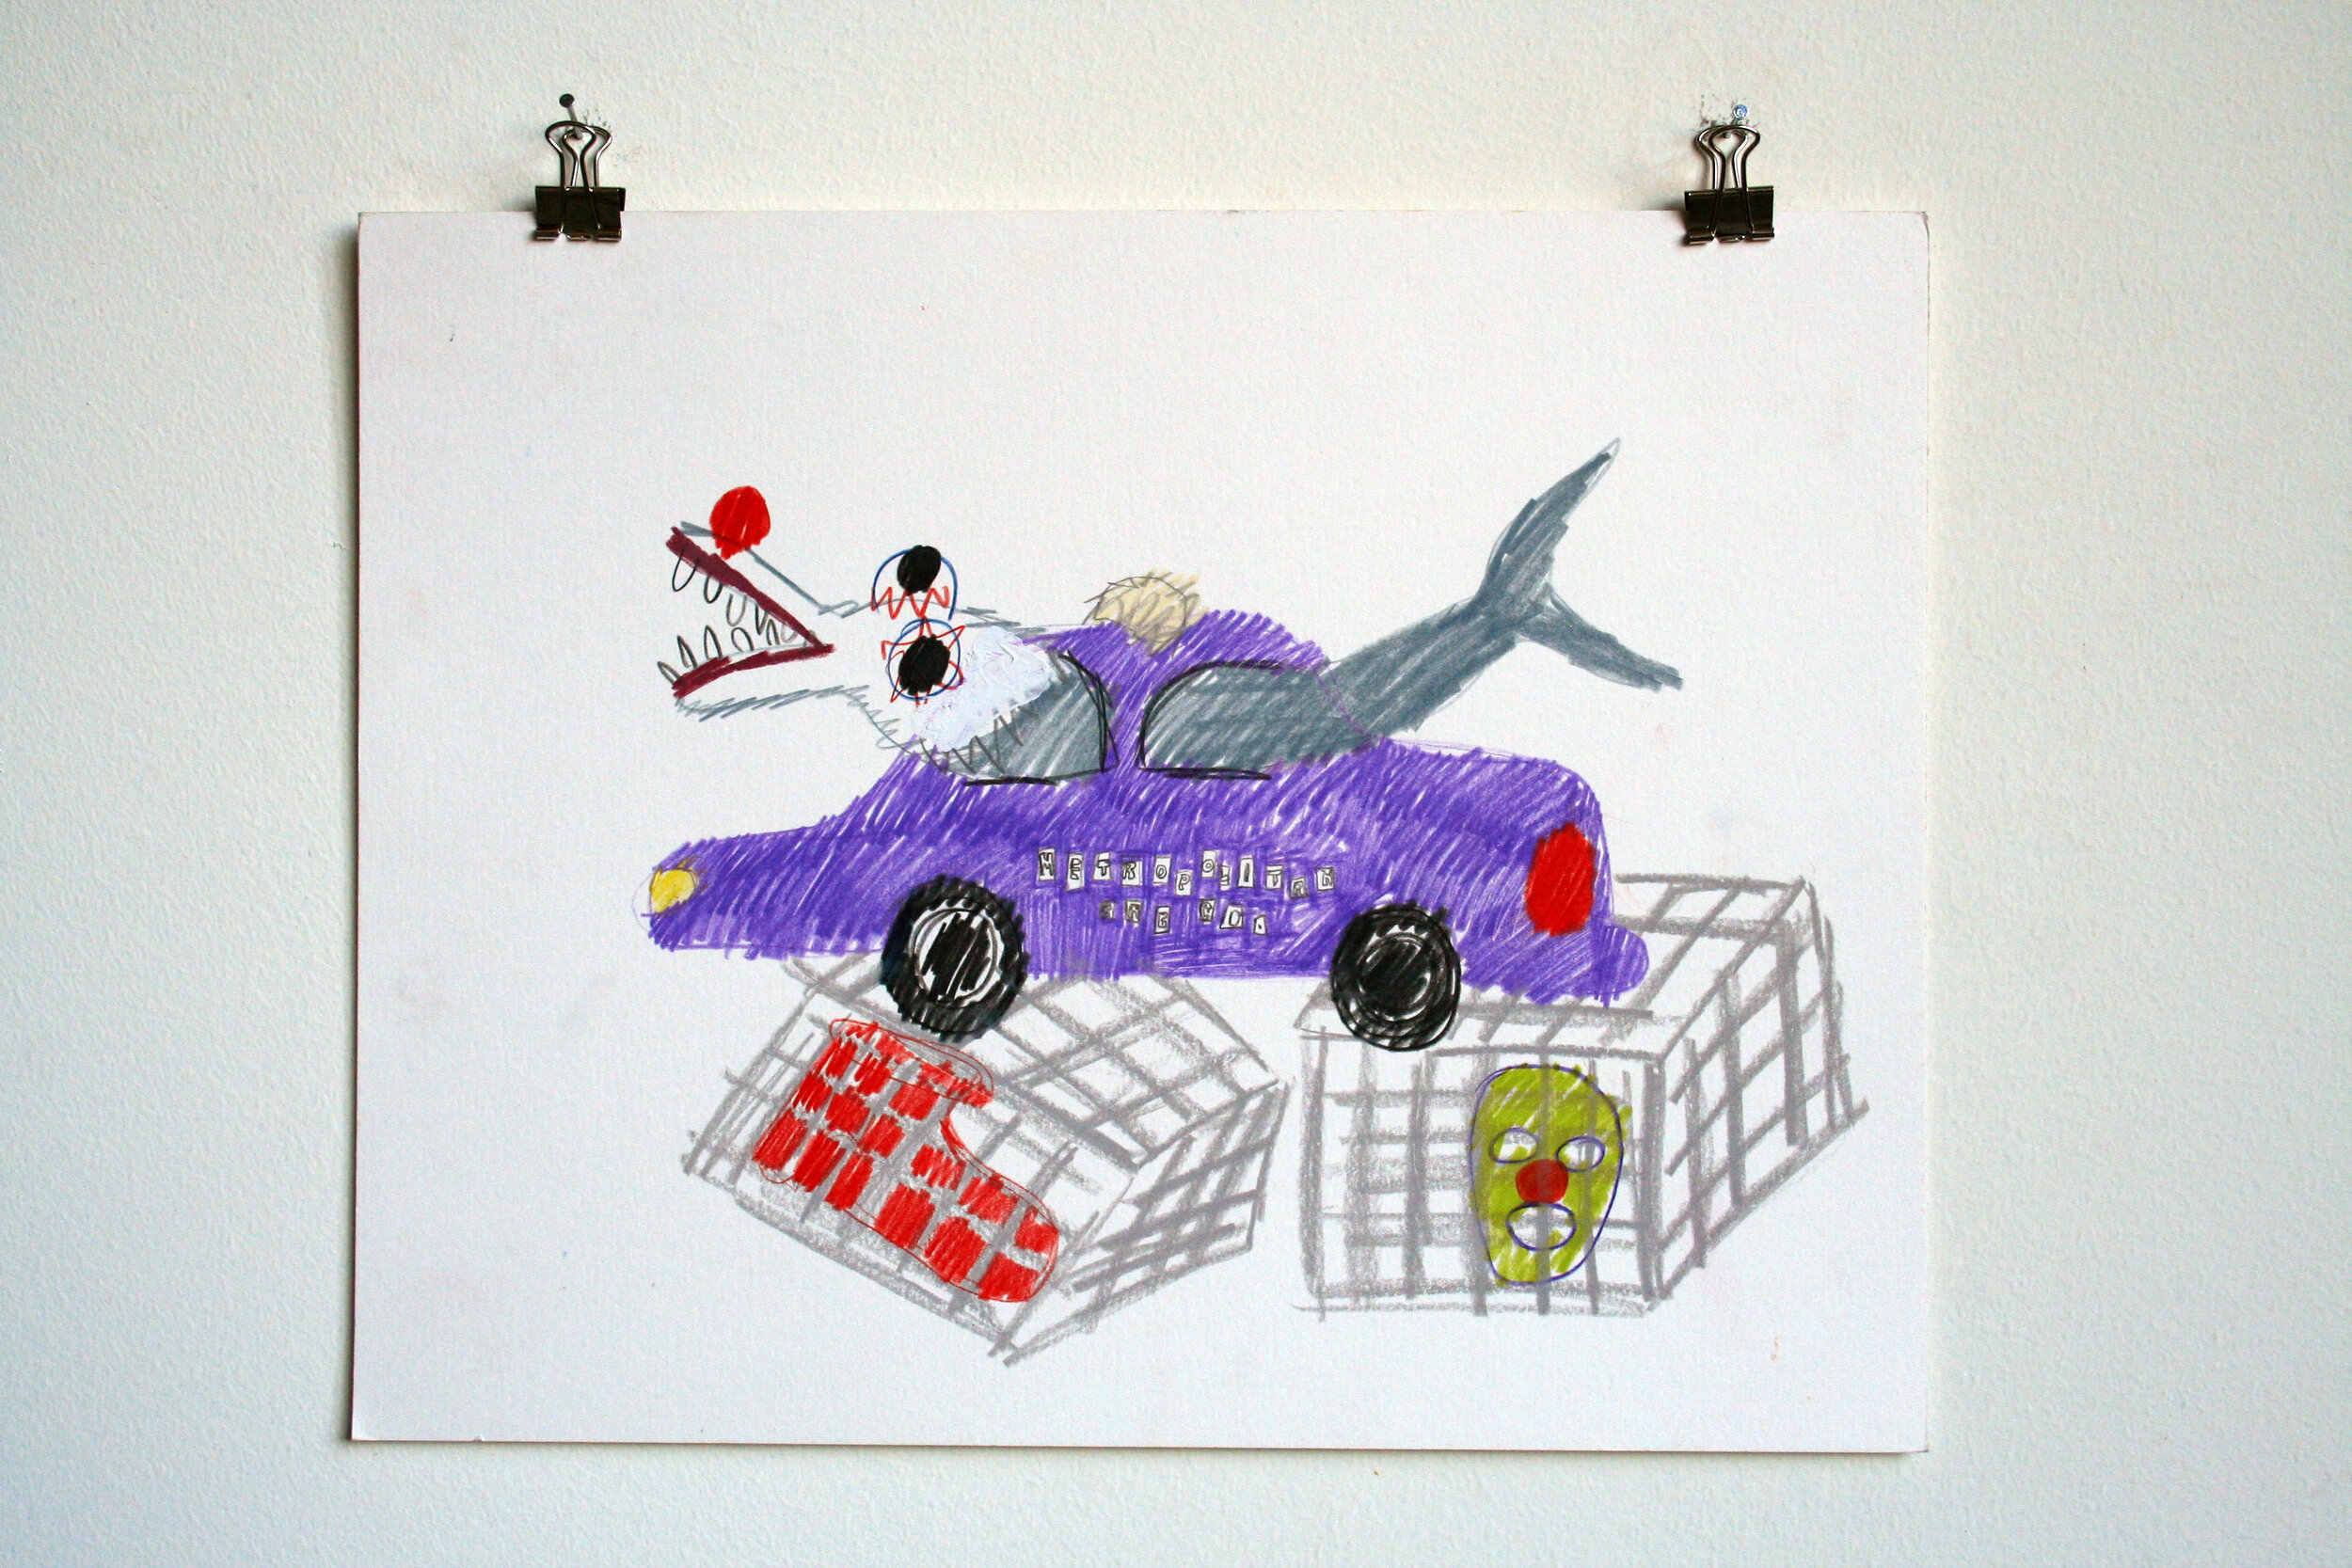   Detroit Metropolitan Cab Crushing Some Cages,  2013  11 x 14 inches (27.94 x 35.56 cm.)  Colored pencil on paper 